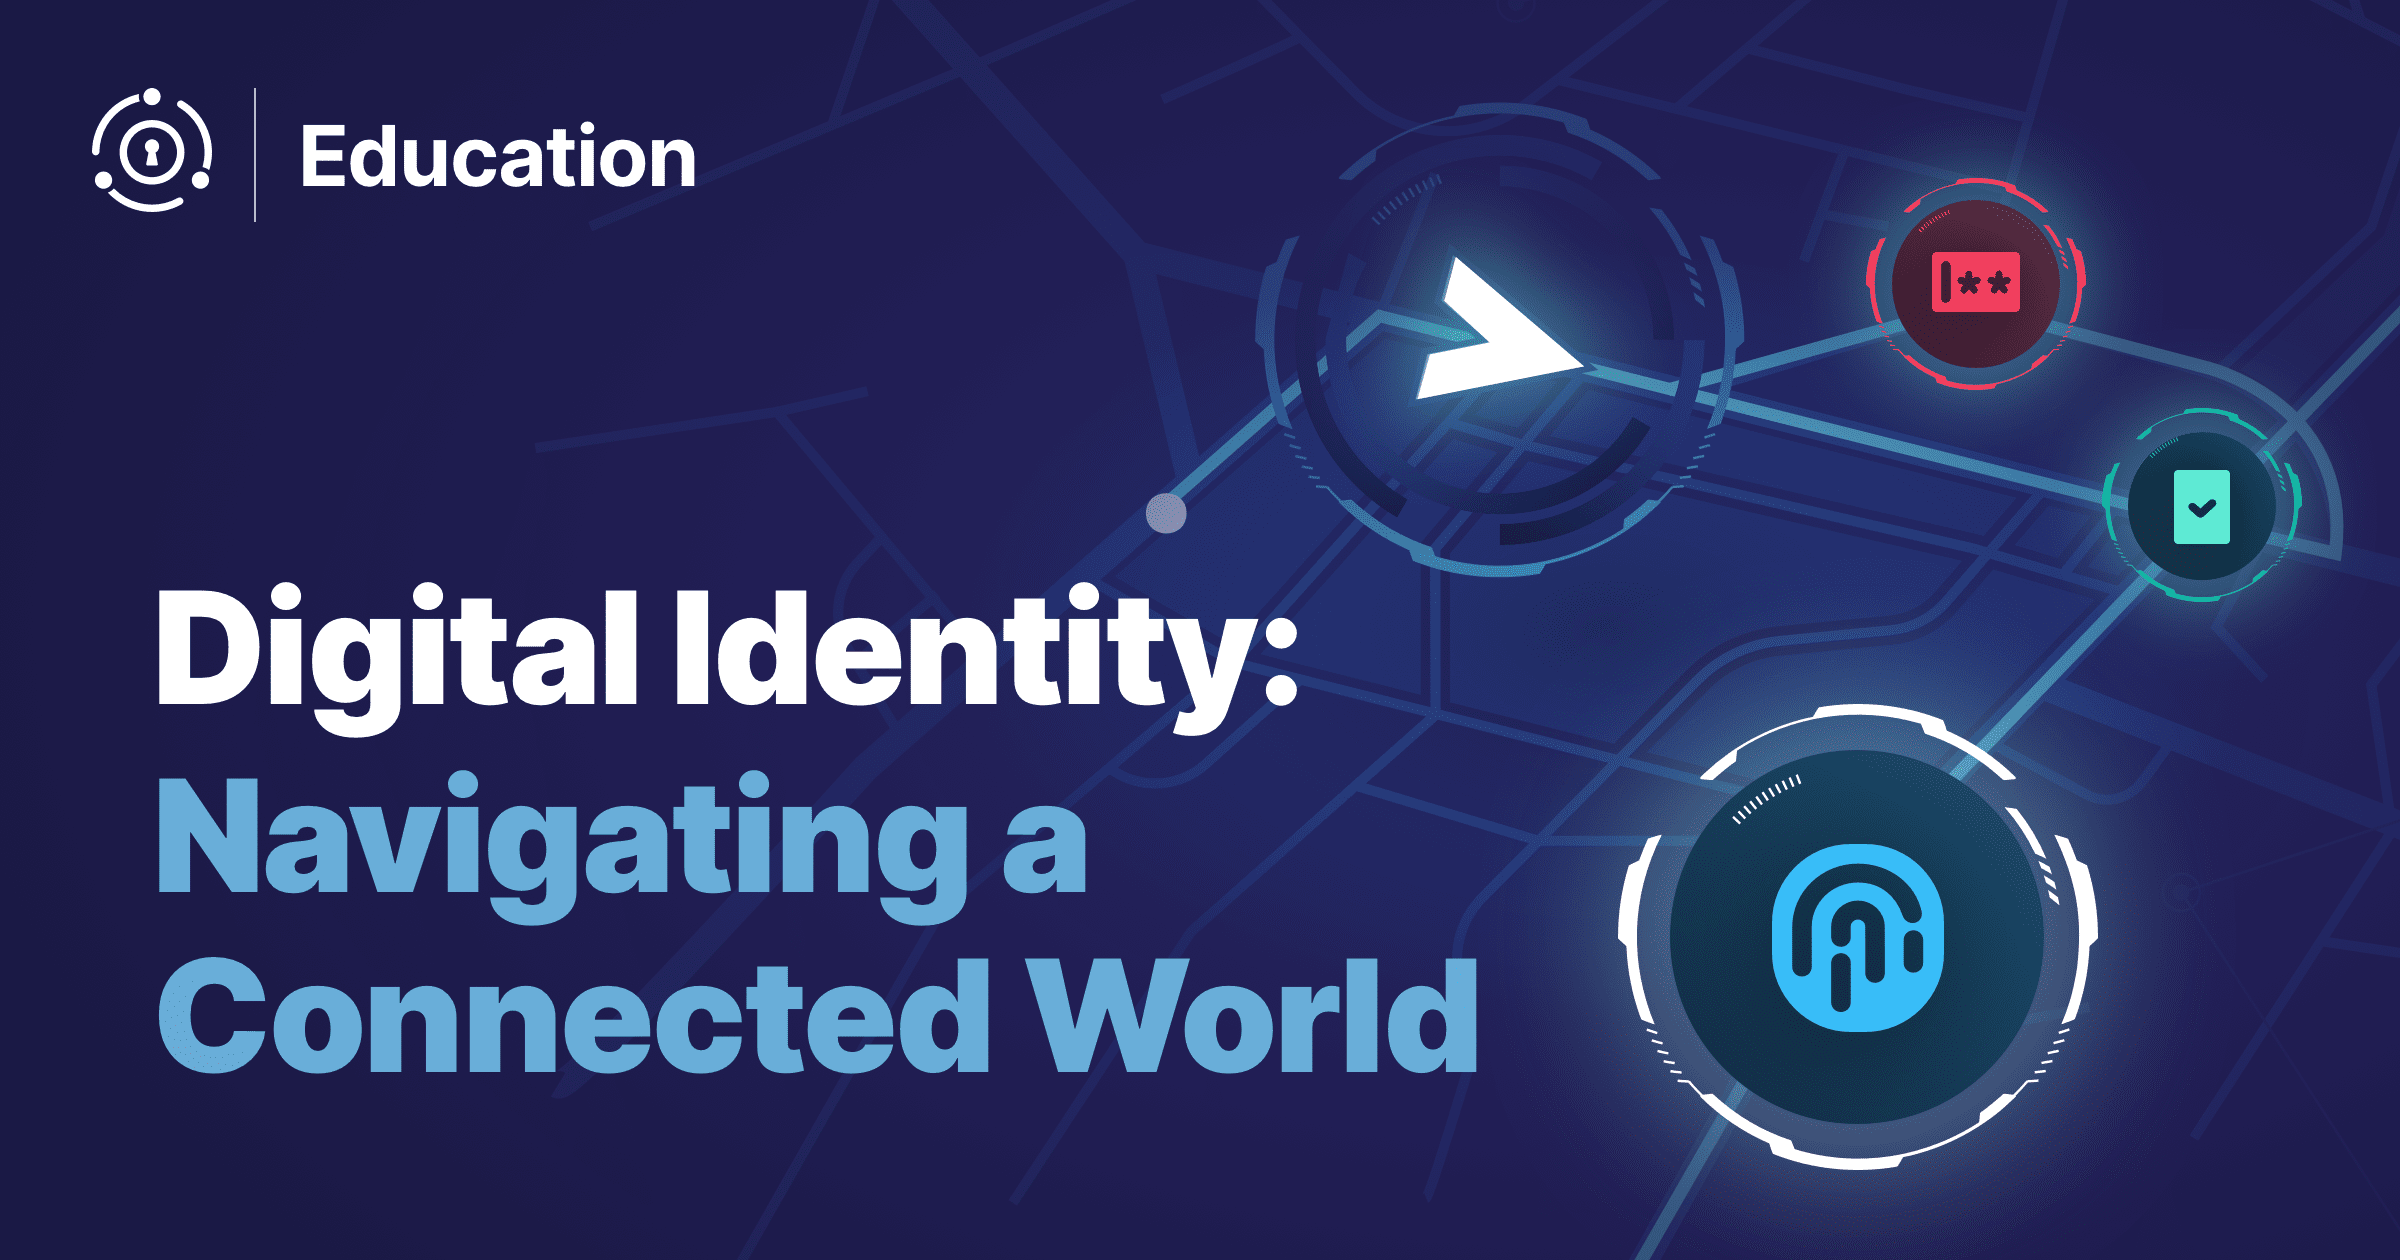 Digital Identity - Human Elements of a Connected World